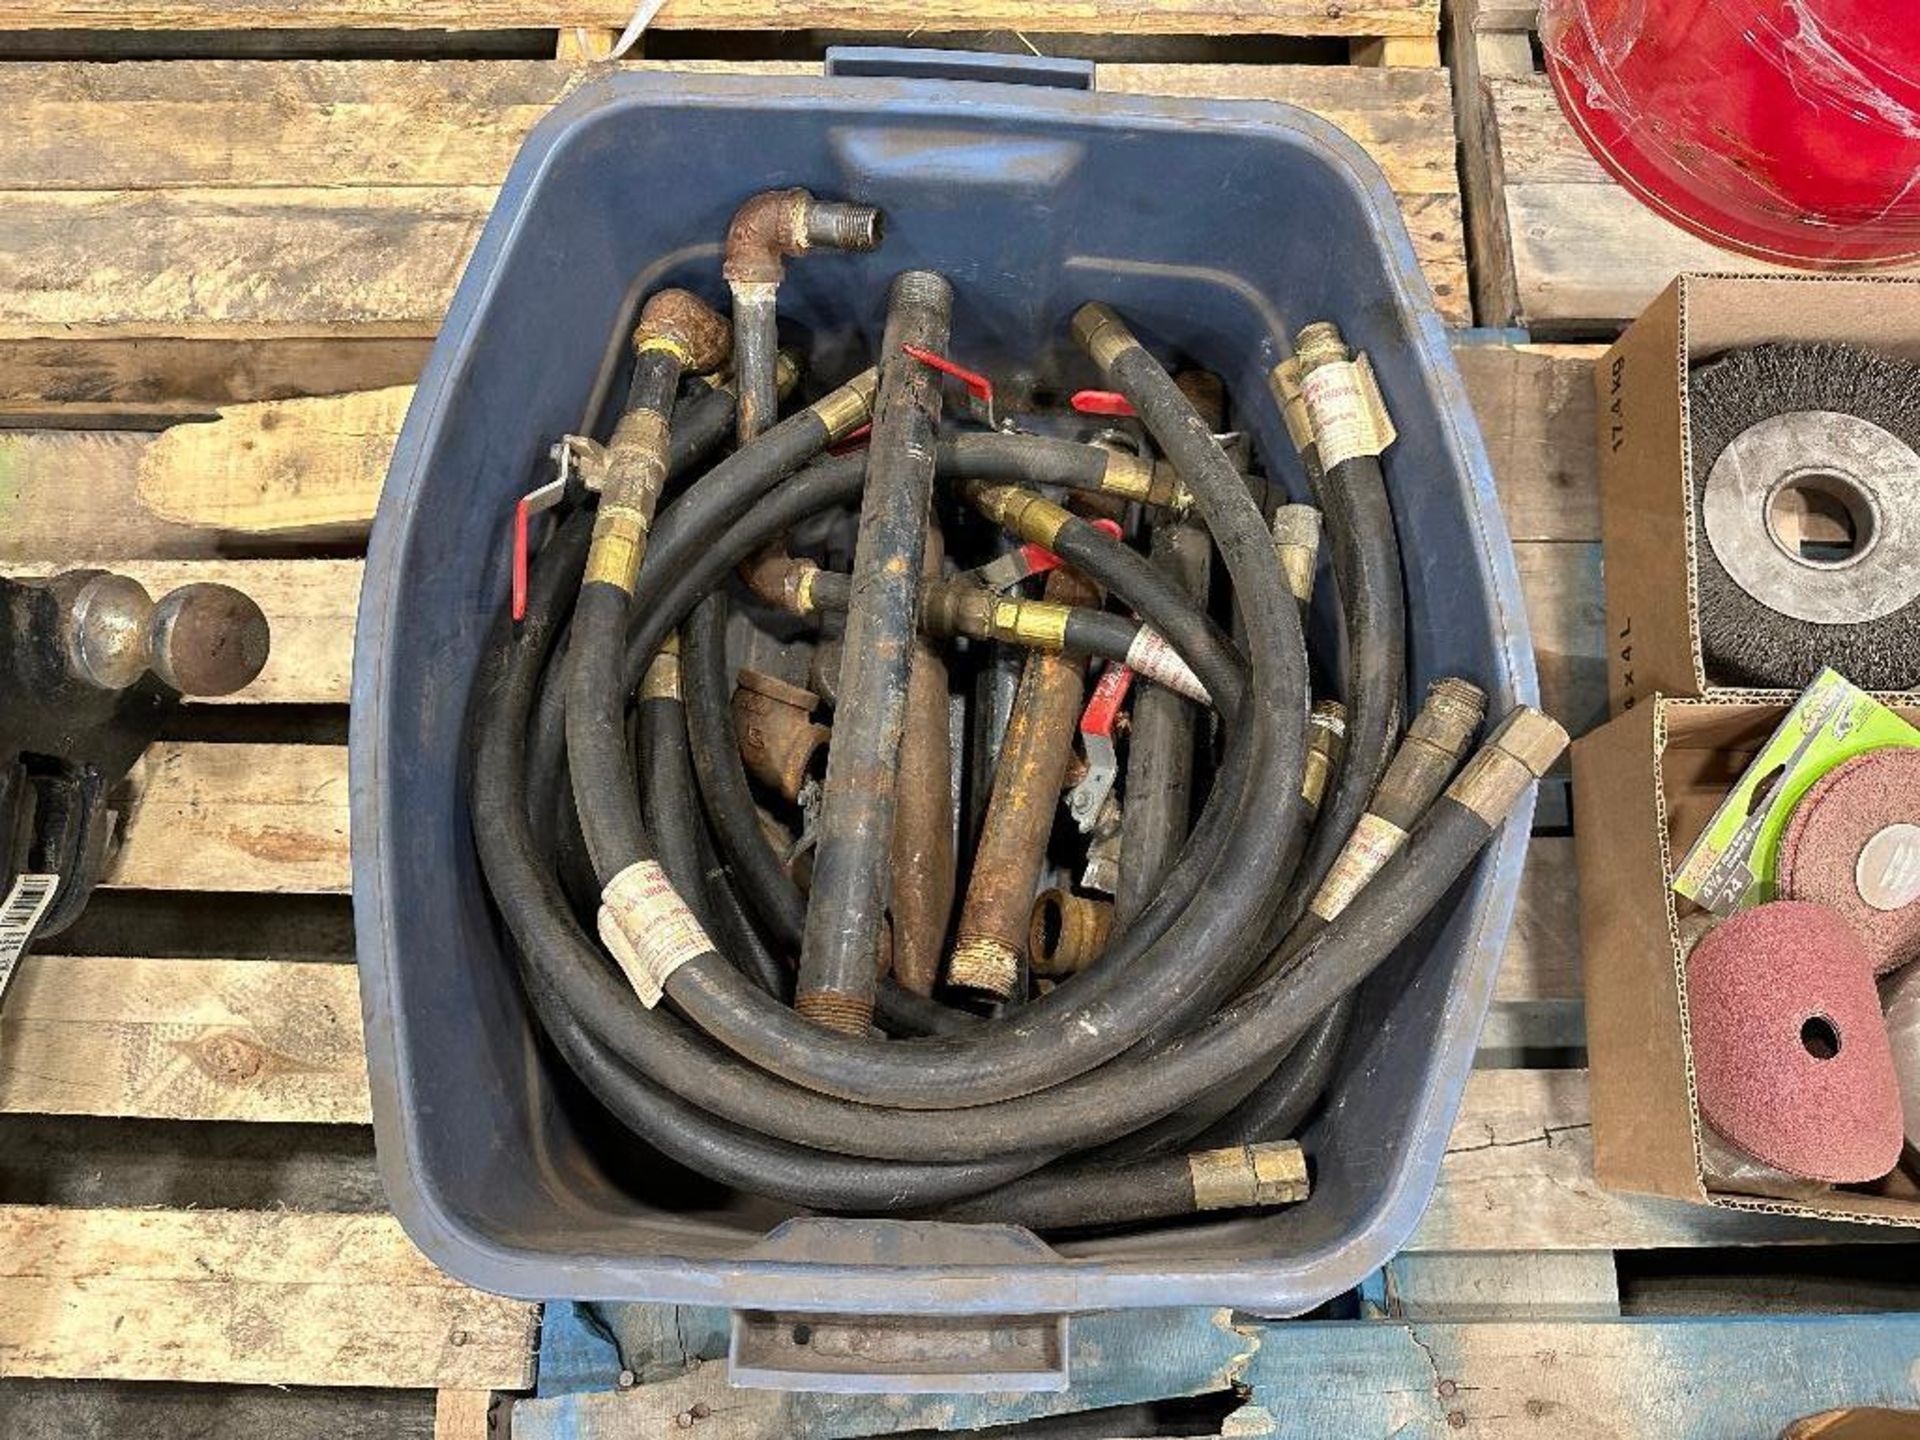 Lot of Asst. Hoses, Pipes, Valves, etc. - Image 2 of 3